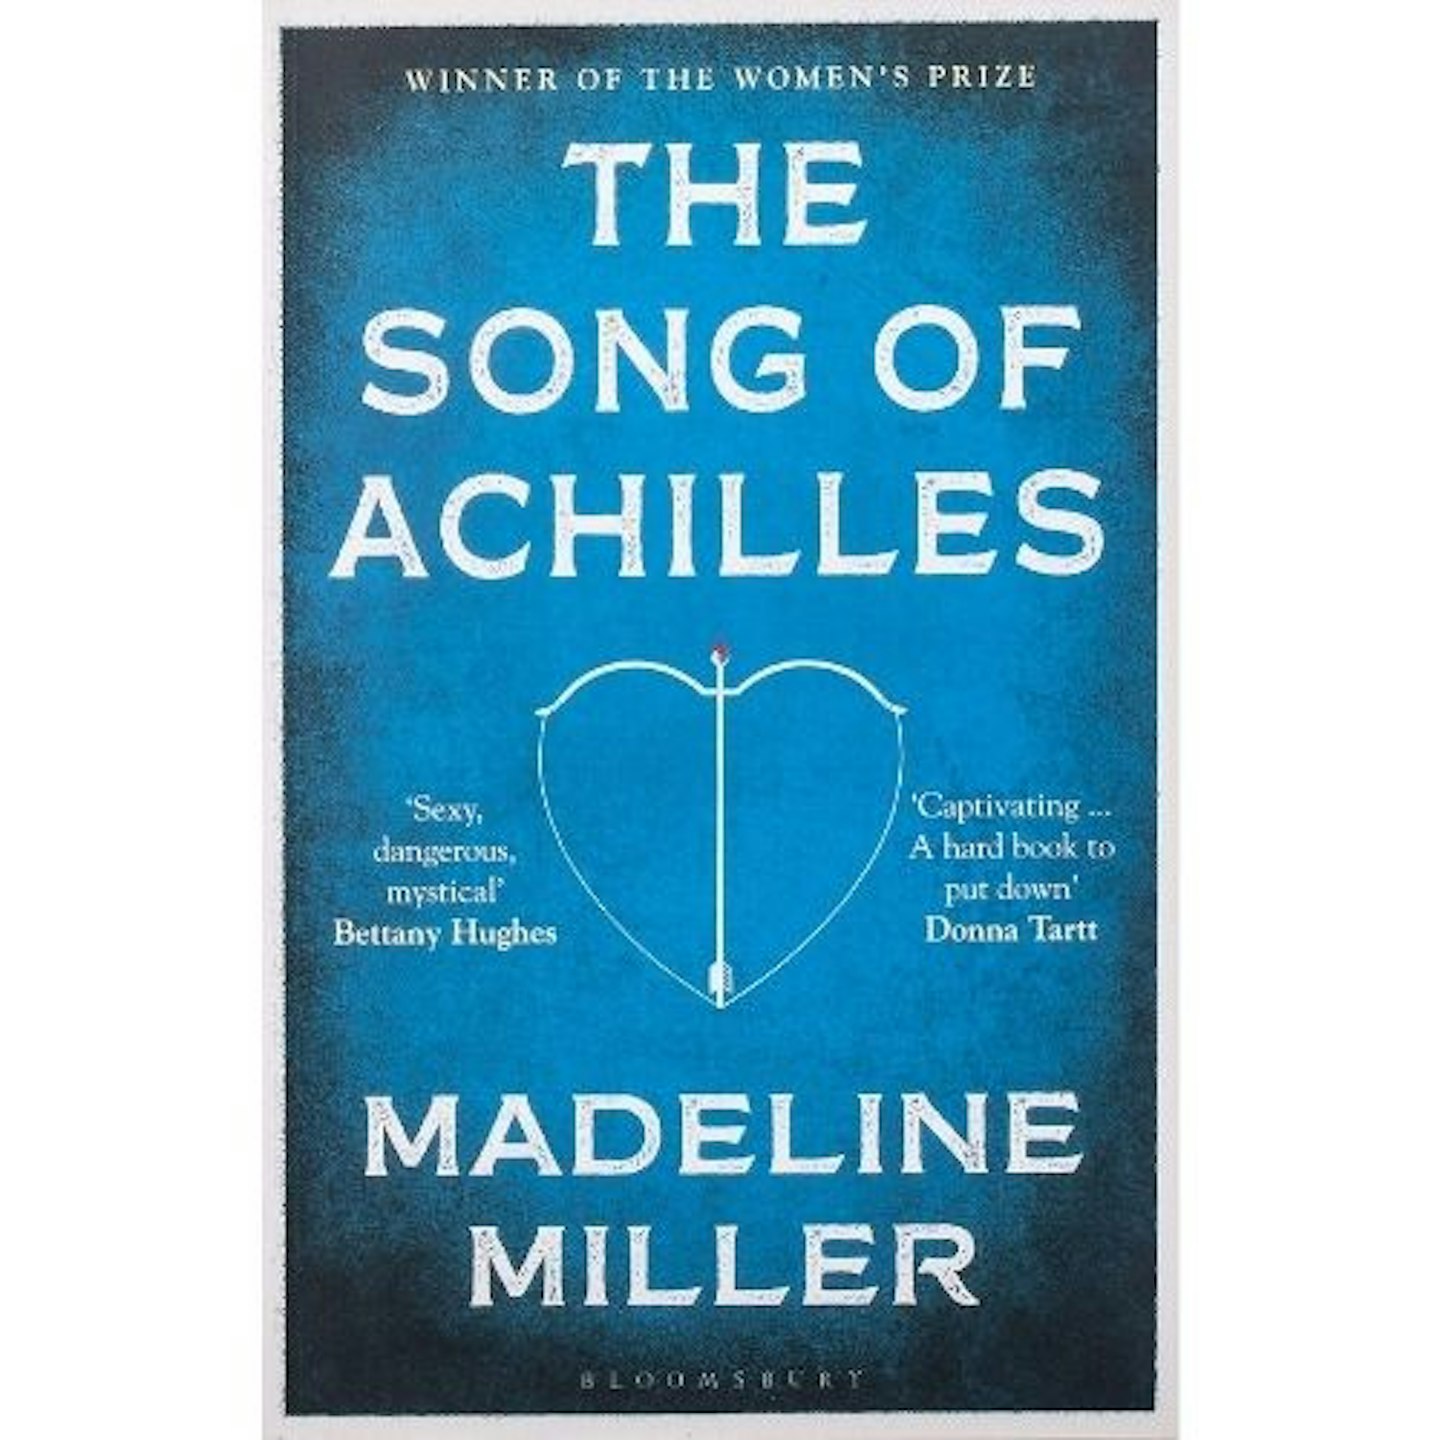 The Song of Achilles – Madeline Miller